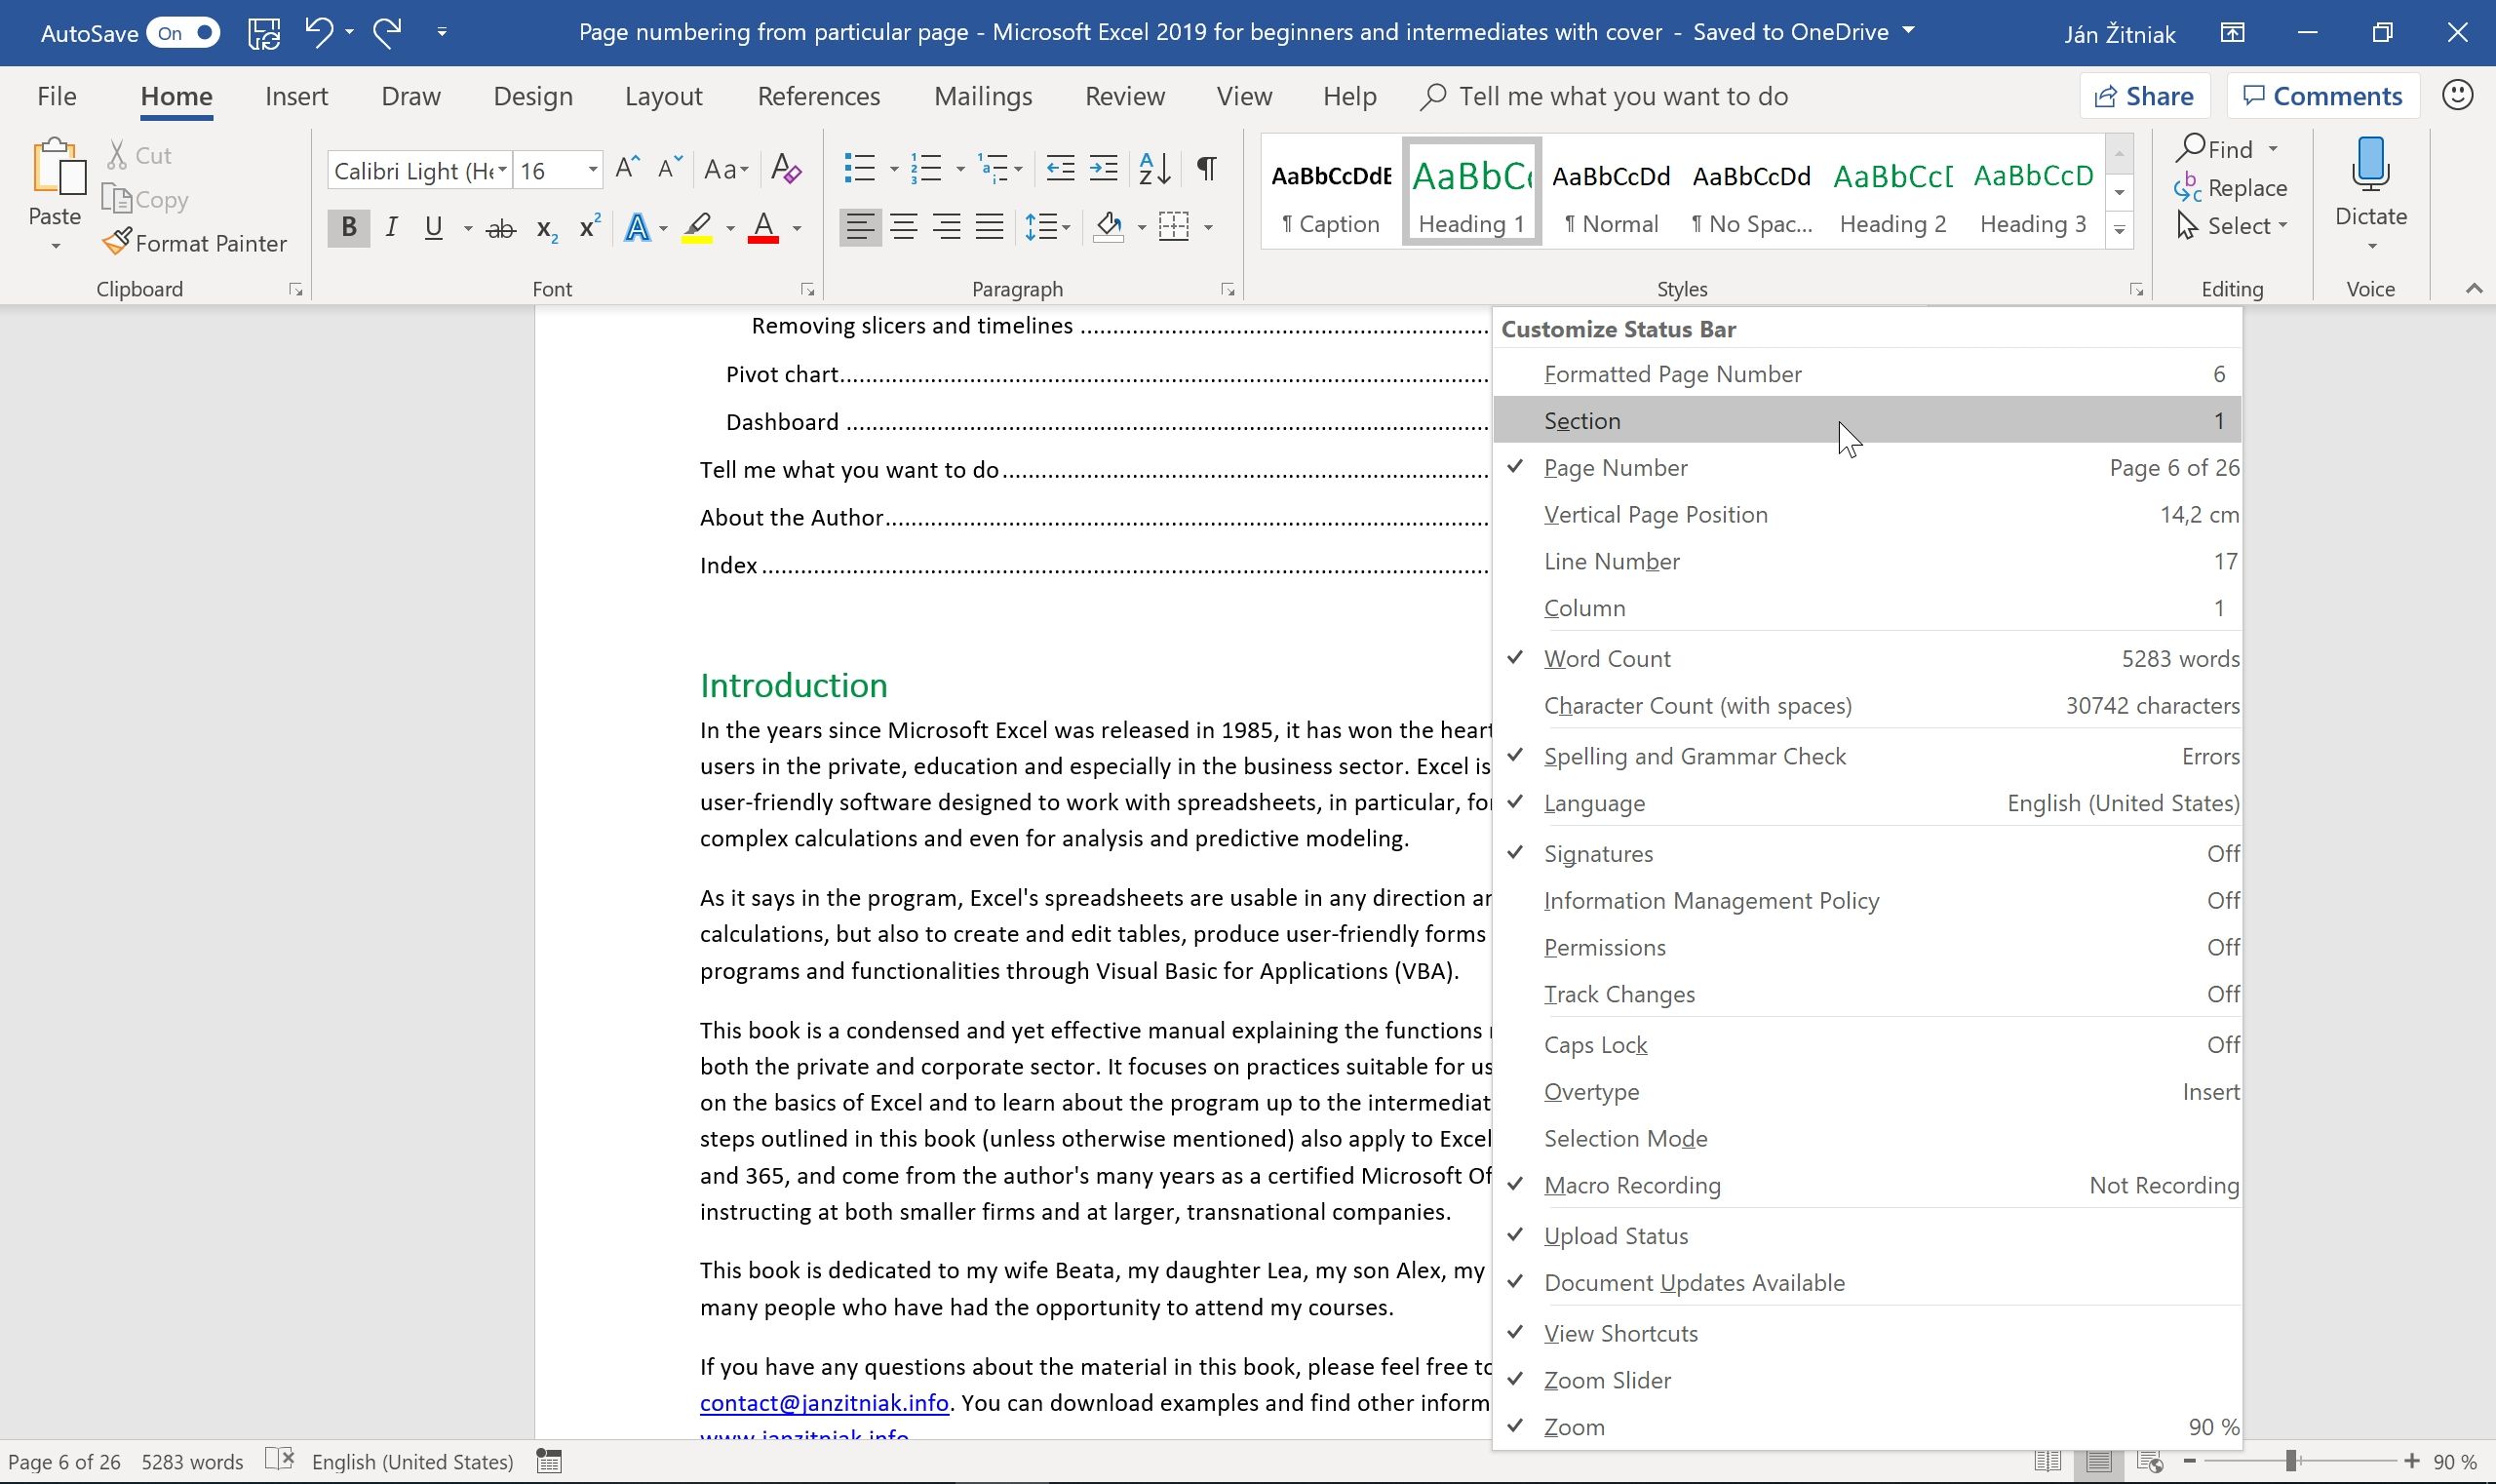 page numbering from specific page in microsoft word 03